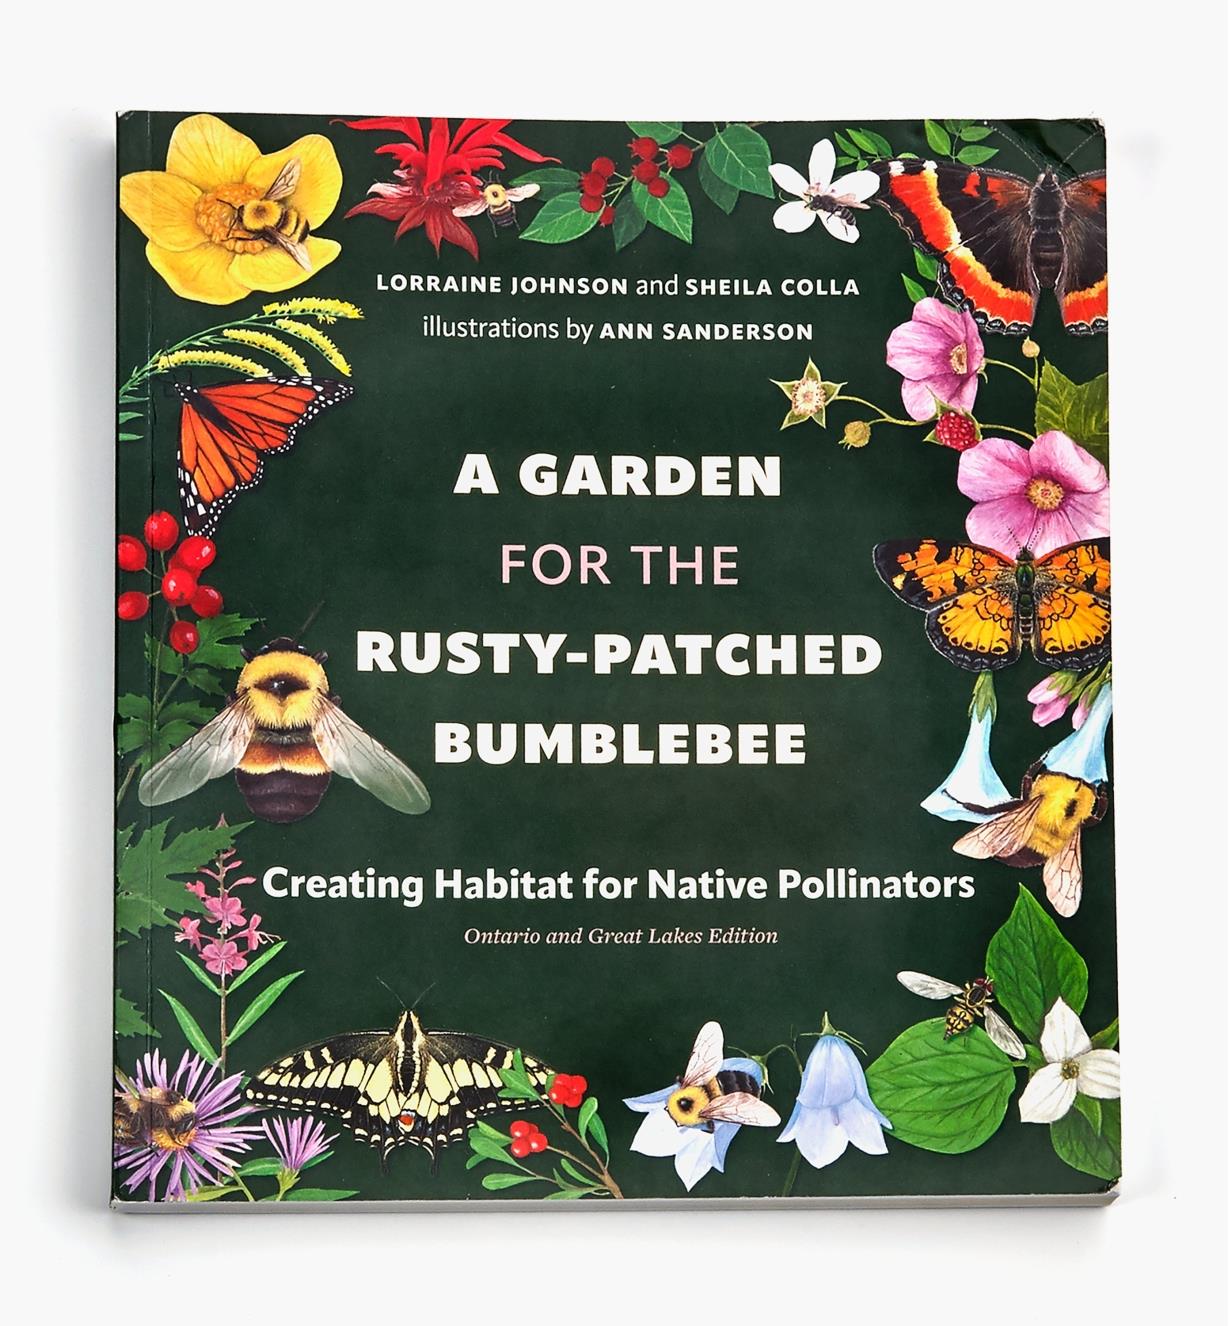 LA974 - A Garden for the Rusty-Patched Bumblebee